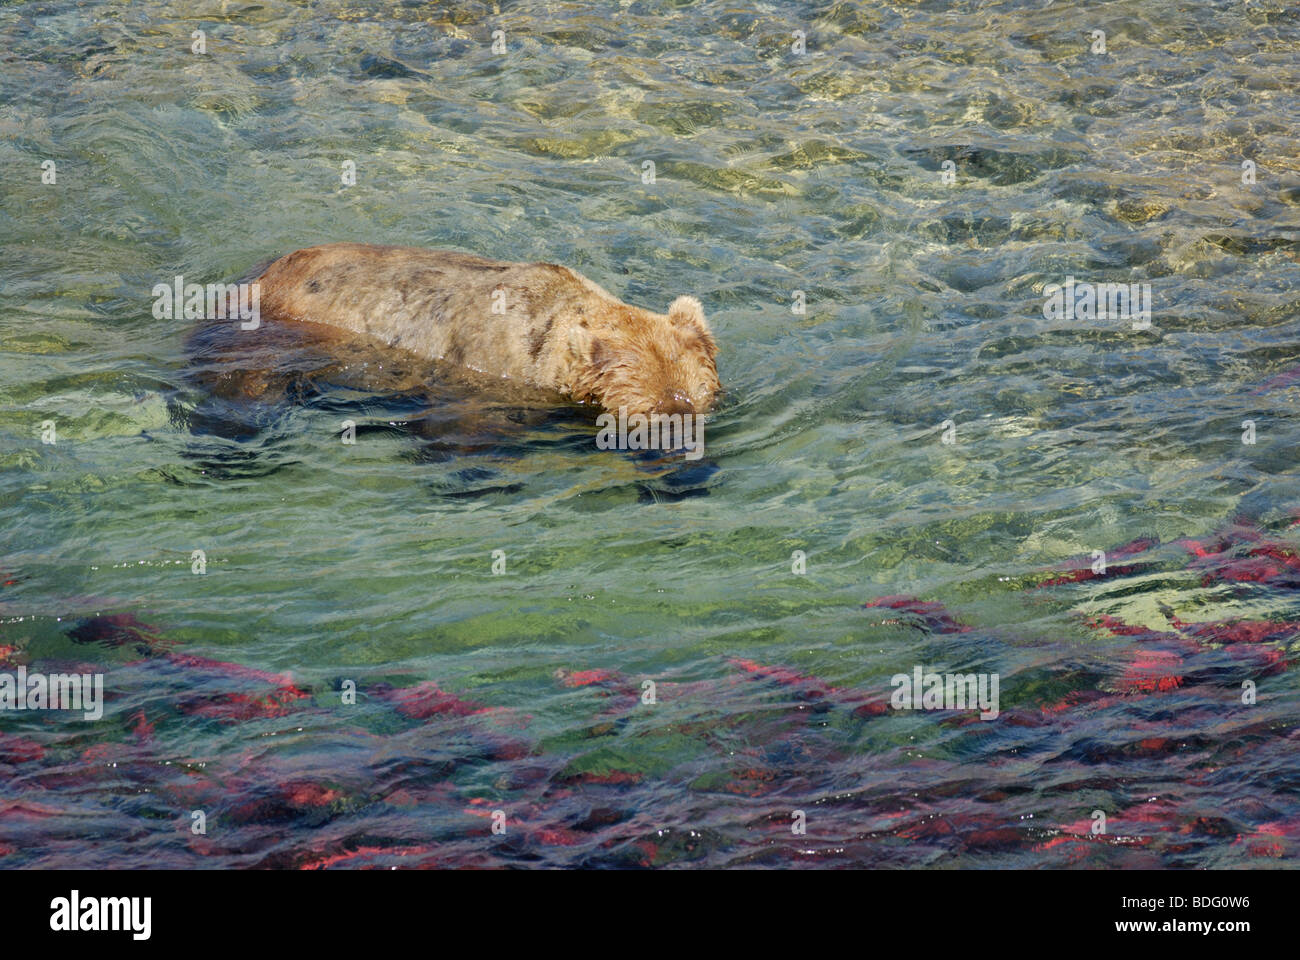 Brown bear or grizzly bear, Ursus arctos horribilis, with head underwater hunting for  salmon Stock Photo